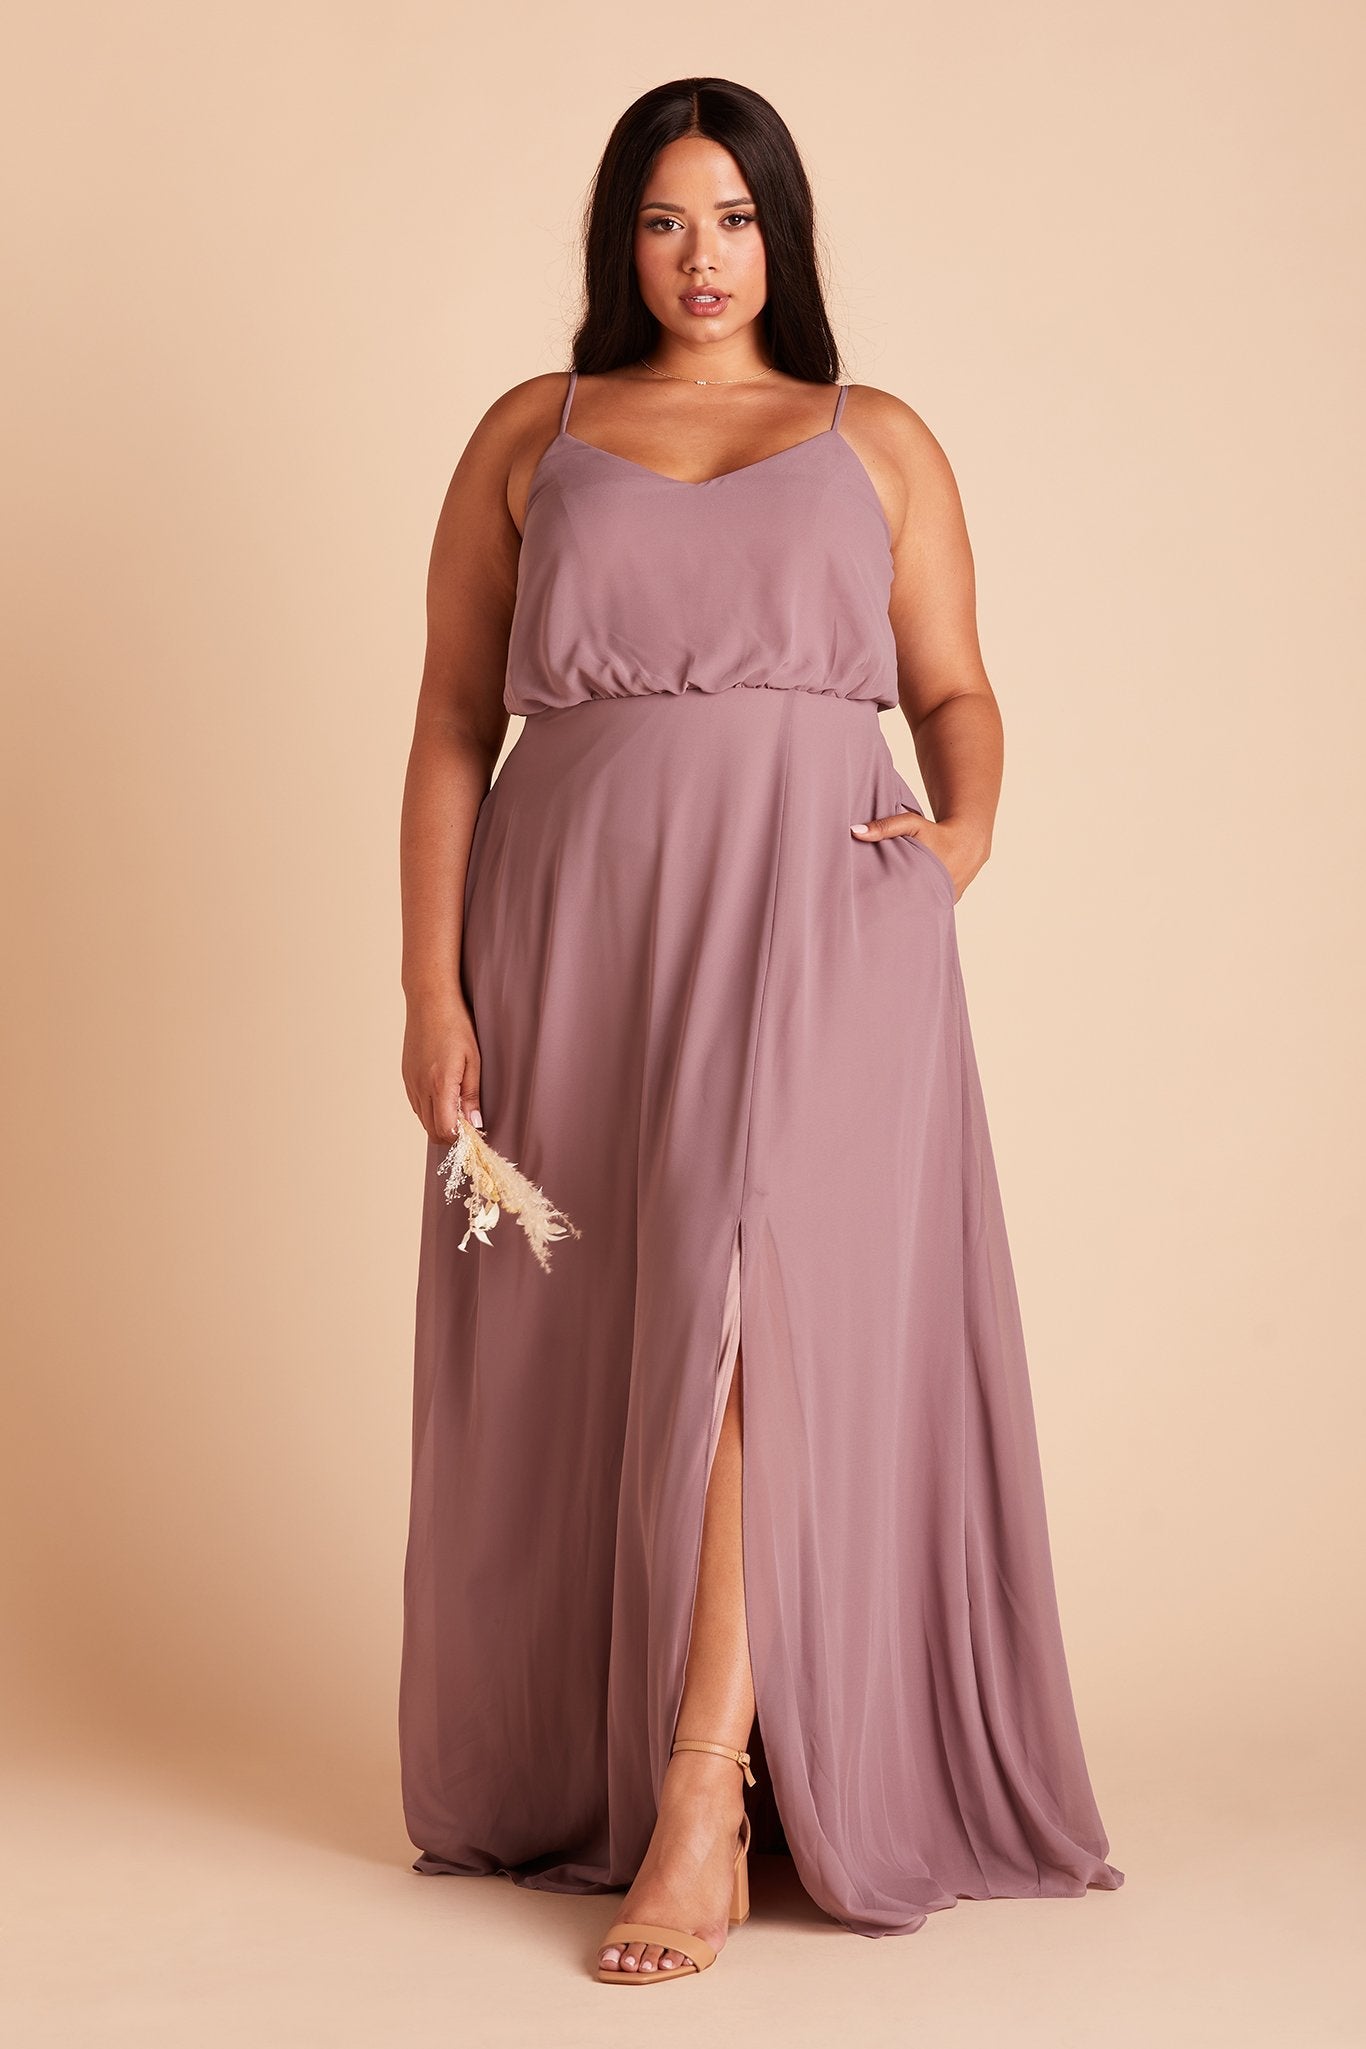 Gwennie plus size bridesmaid dress with slit in dark mauve chiffon by Birdy Grey, front view with hand in pocket